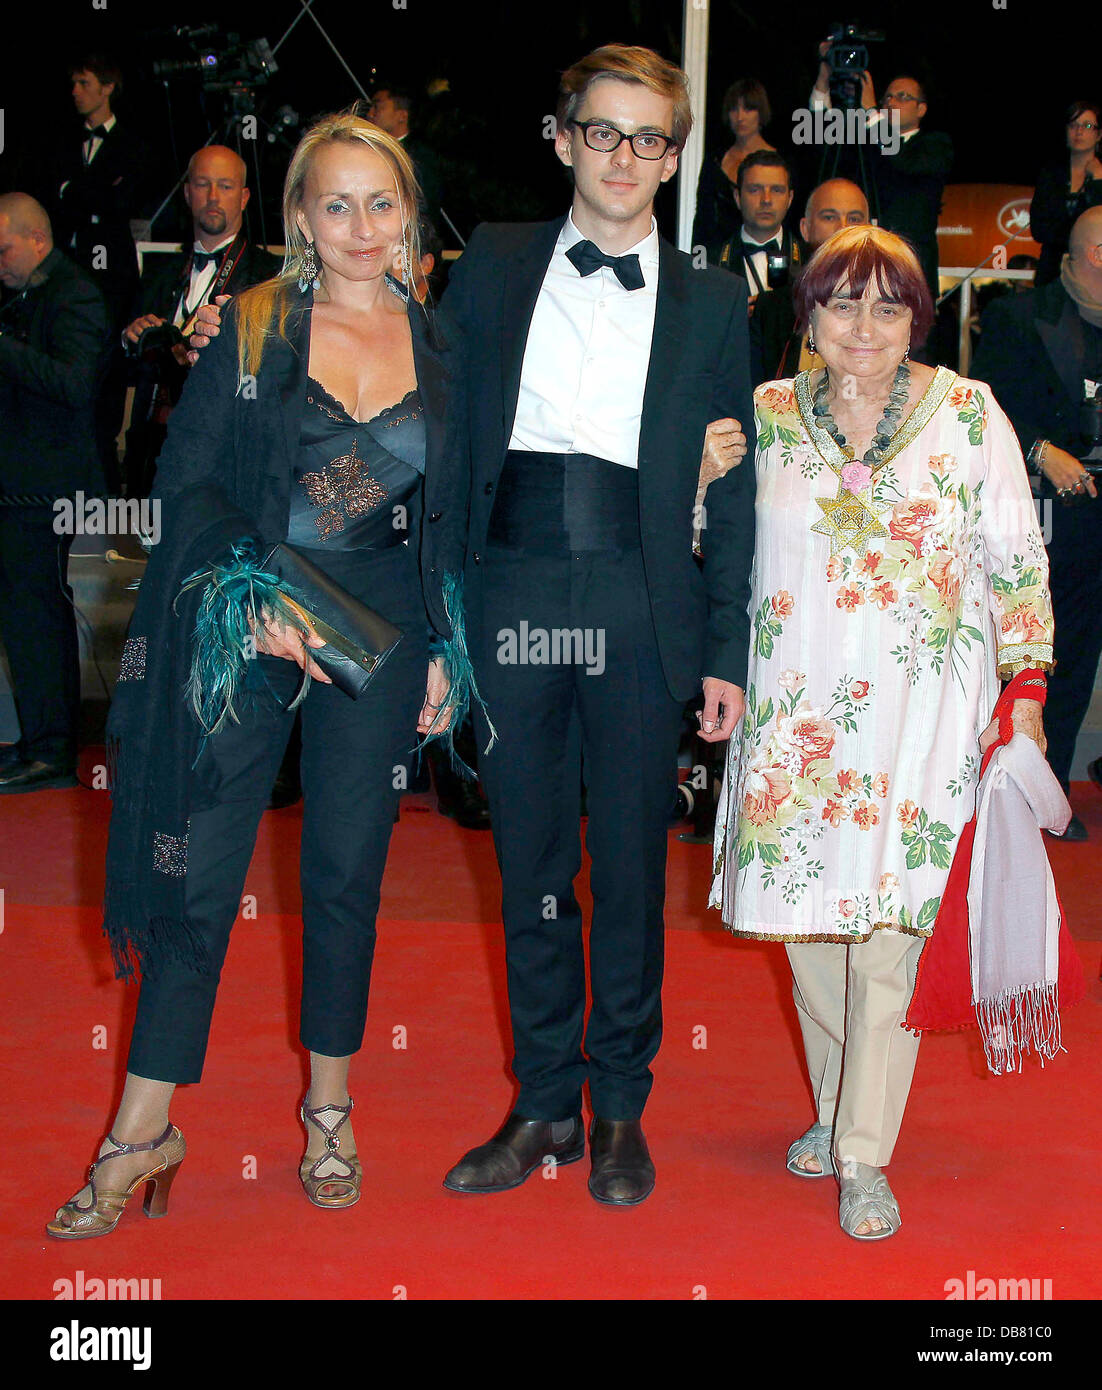 Agnes Varda (right),  2011 Cannes International Film Festival - Day 6 - L' Apollonide' (House of Tolerance) - Premiere Cannes, France - 16.05.11 Stock Photo